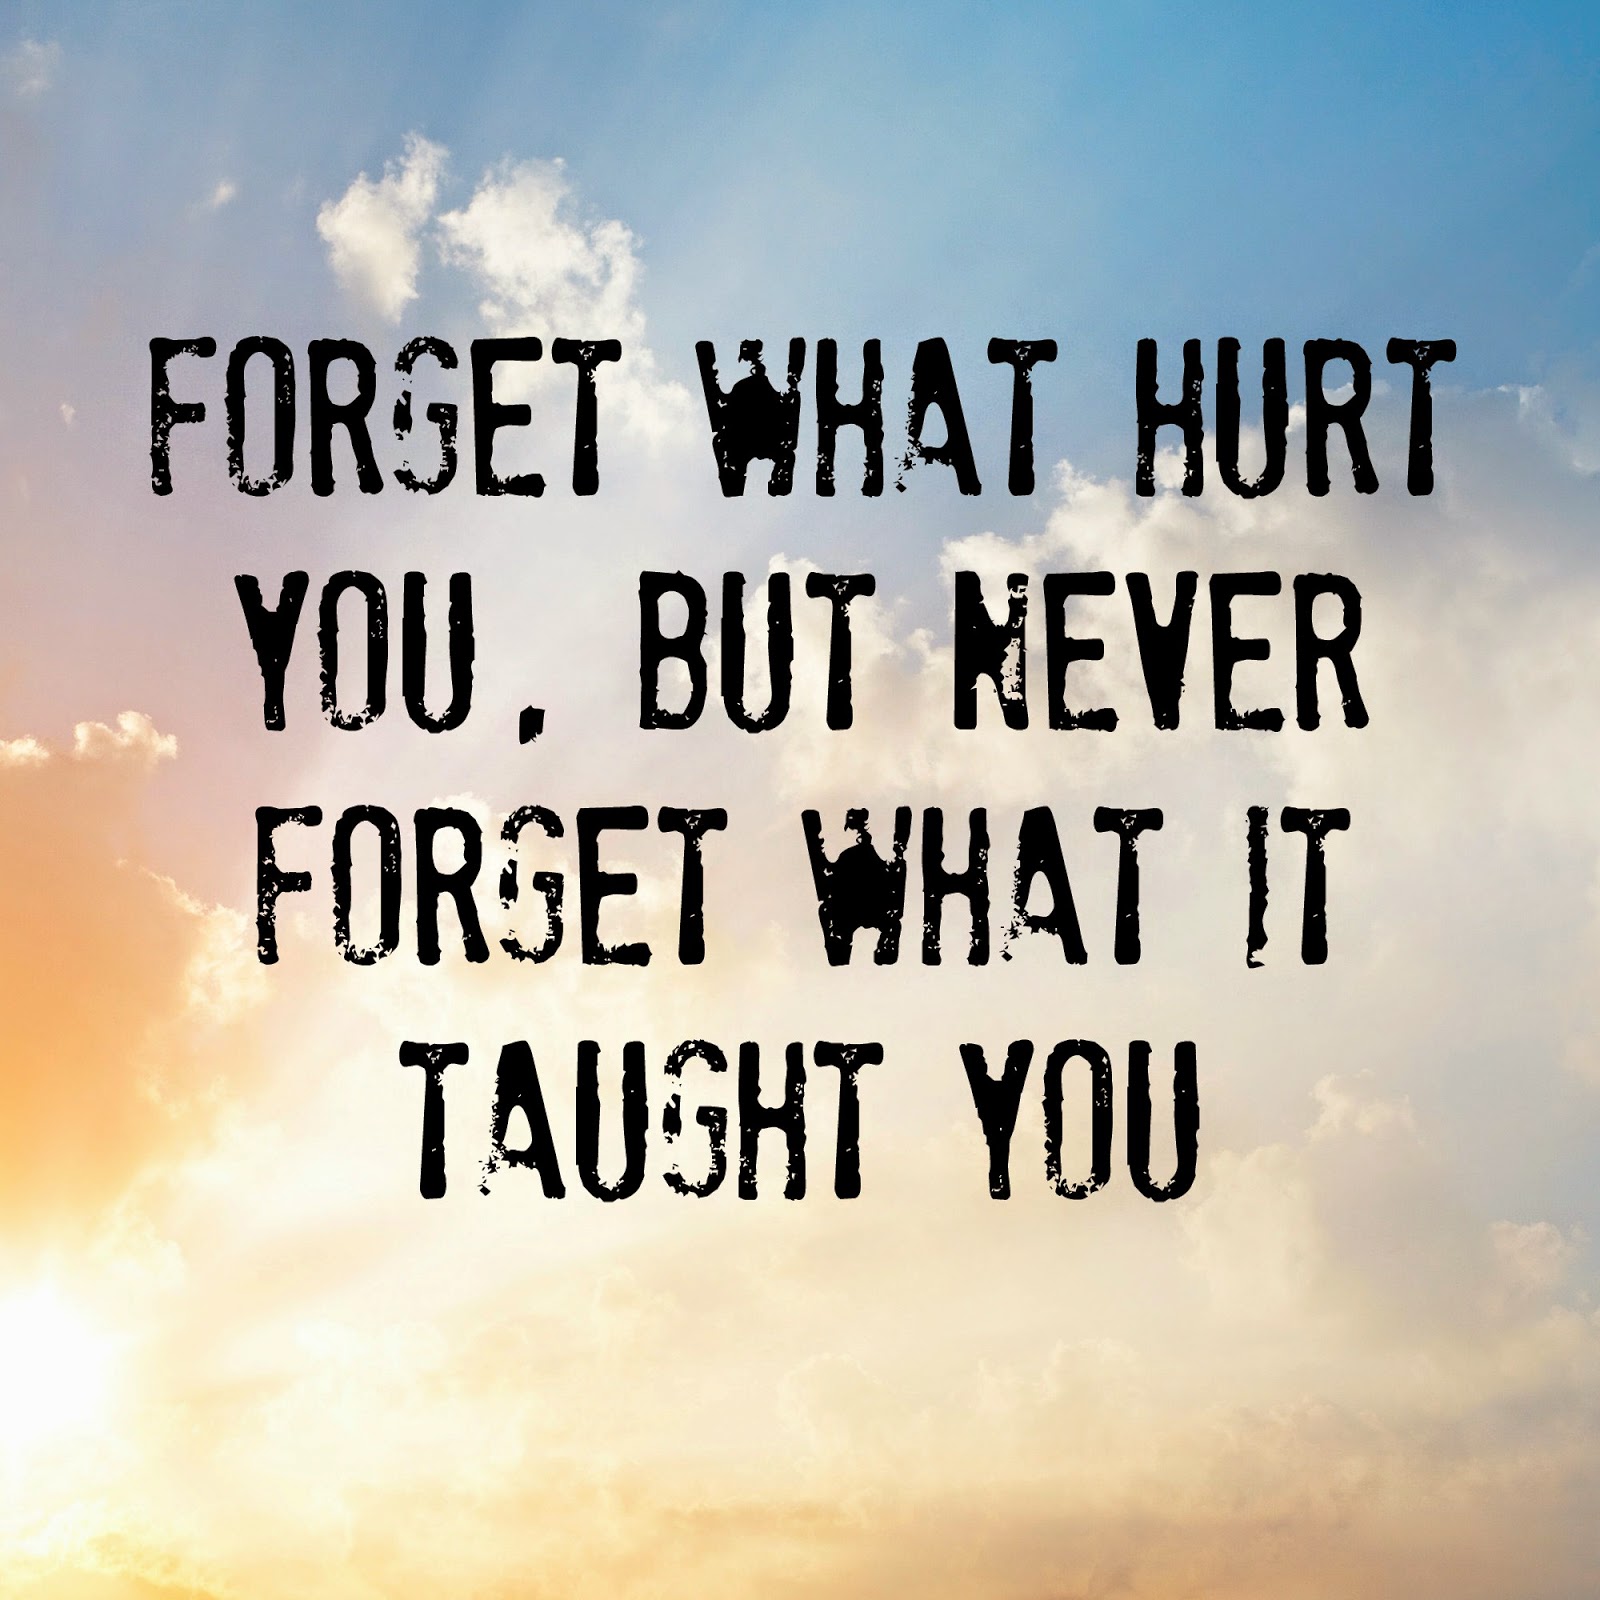 Forget what hurt you, but never forget what it taught you